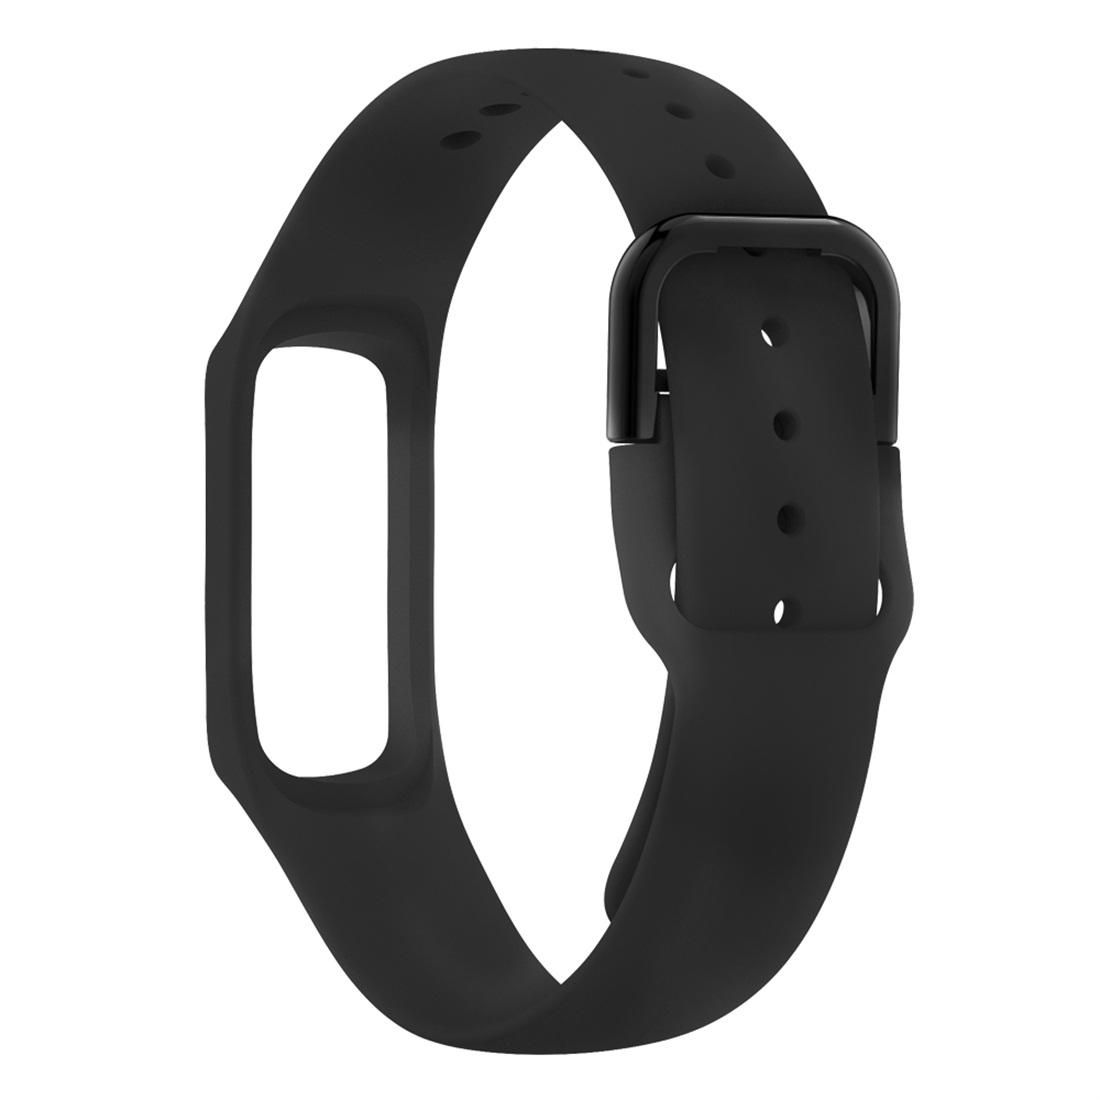 Smart Watch Pure Color Silicone Wrist Strap Watchband for Galaxy Fit-e (Dark Blue)